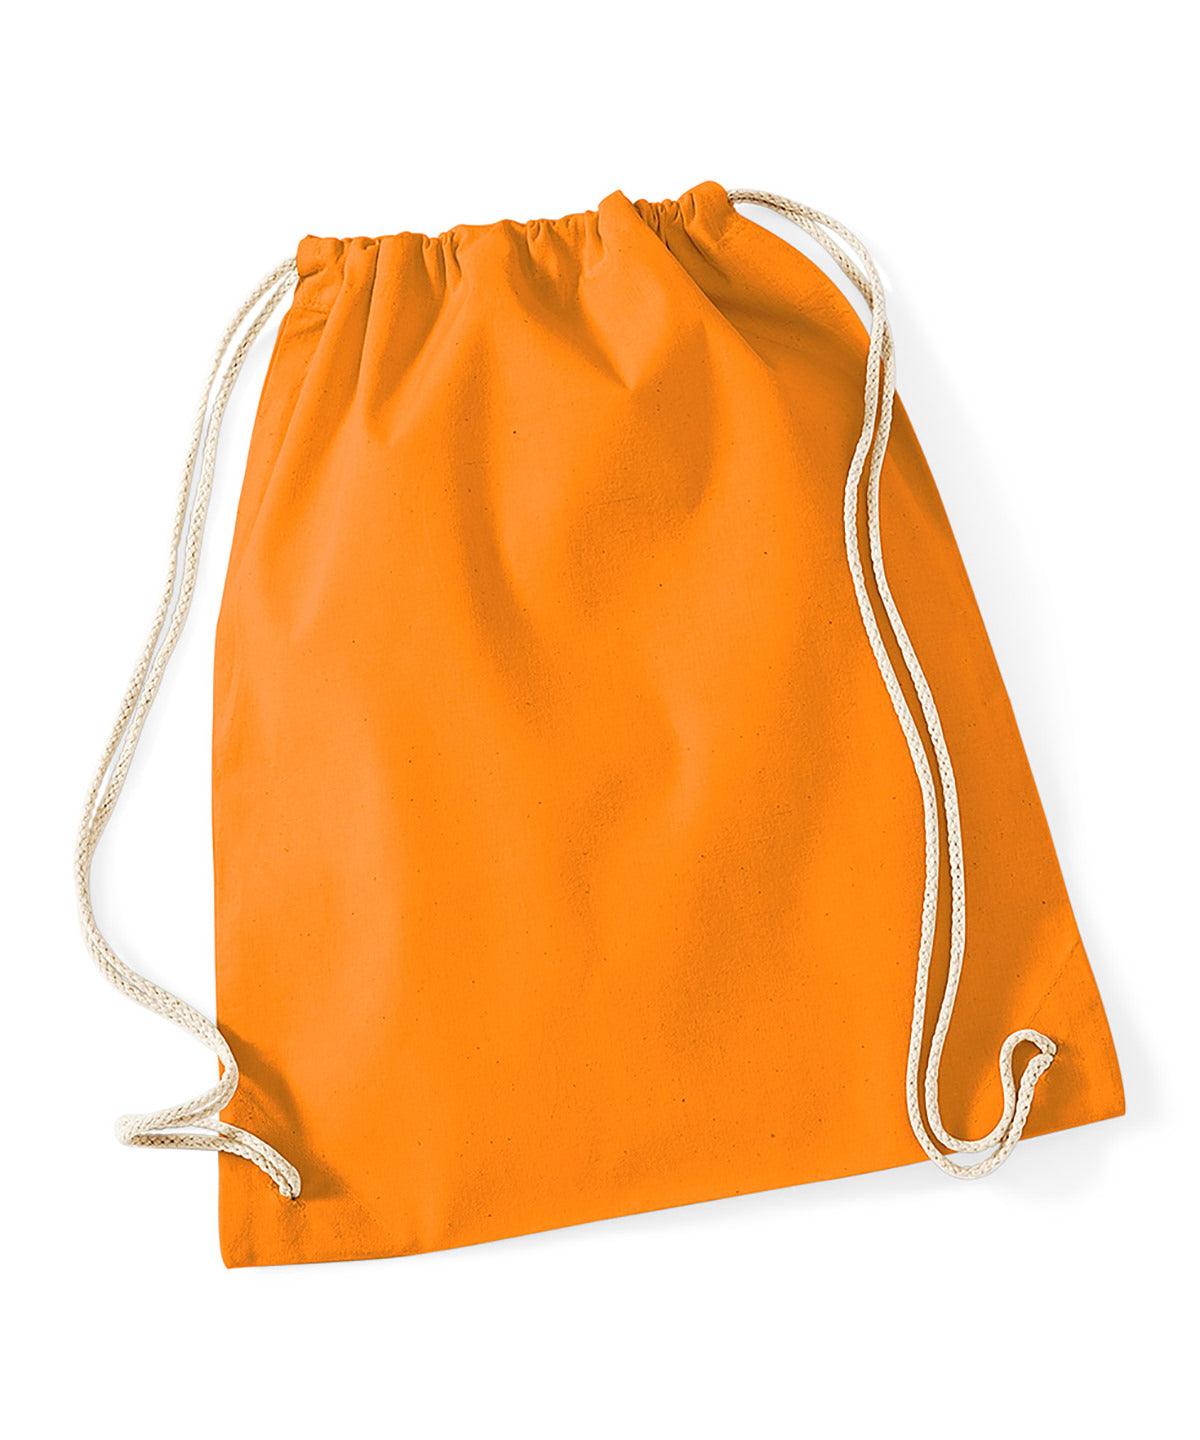 Orange - Cotton gymsac Bags Westford Mill Bags & Luggage, Junior, Must Haves, Pastels and Tie Dye Schoolwear Centres